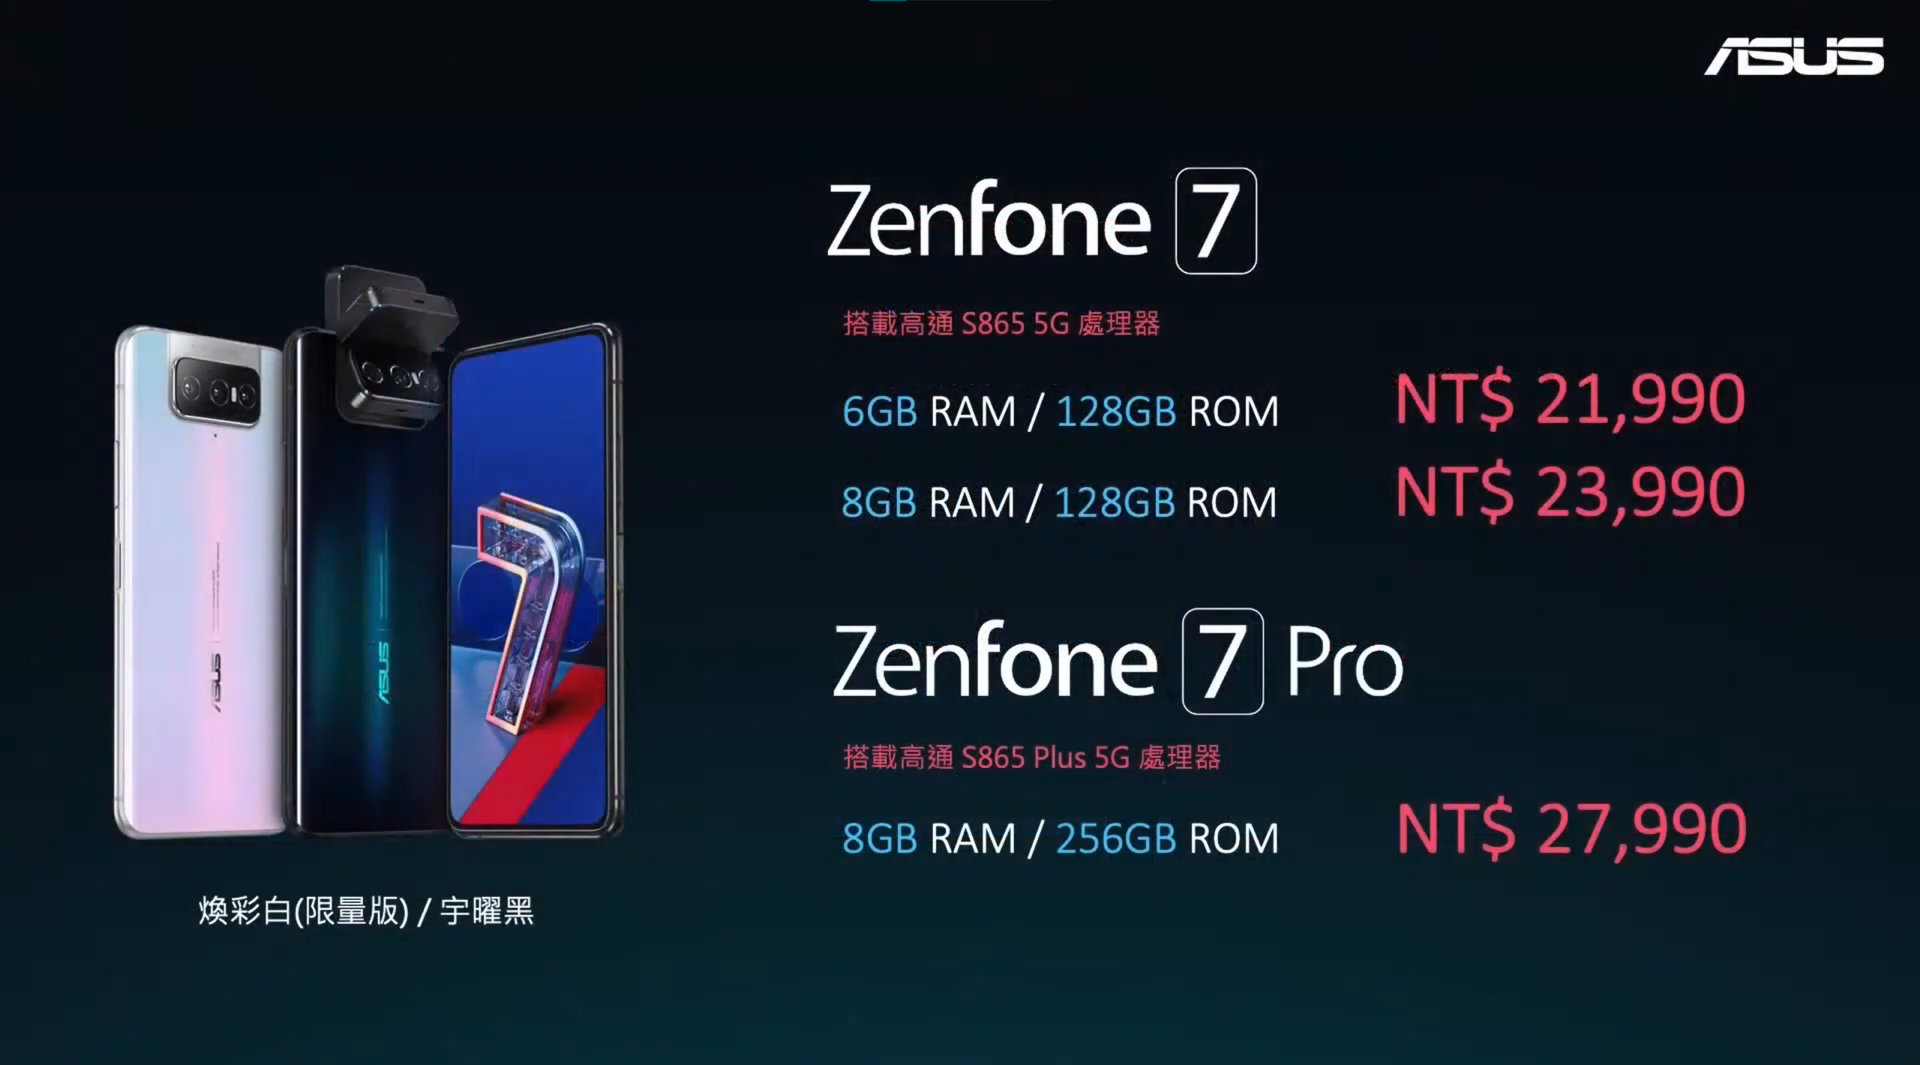 Asus Zenfone 7 and Zenfone 7 Pro launched: All round improvements